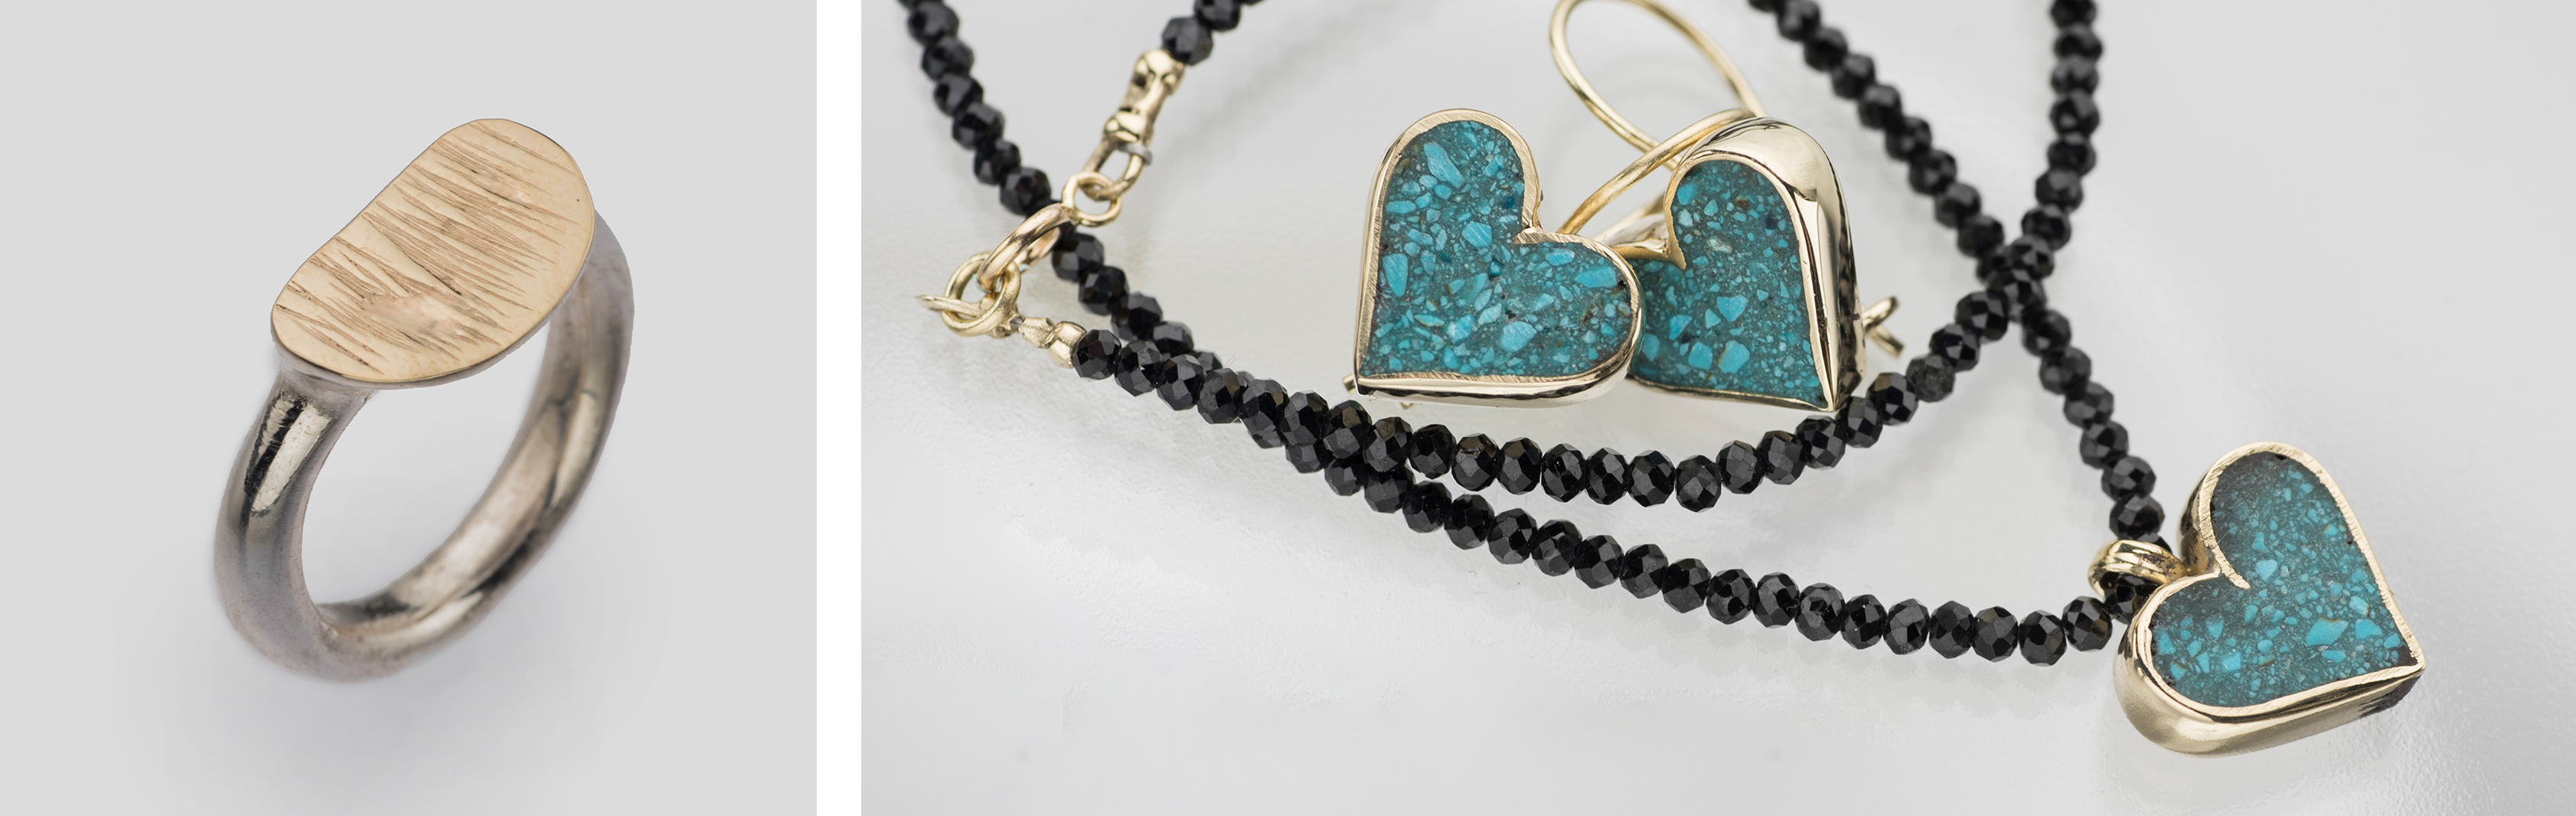 Broken Heart Collection | 925 Sterling Silver & 9K Gold Jewelry with Turquoise and Spinel